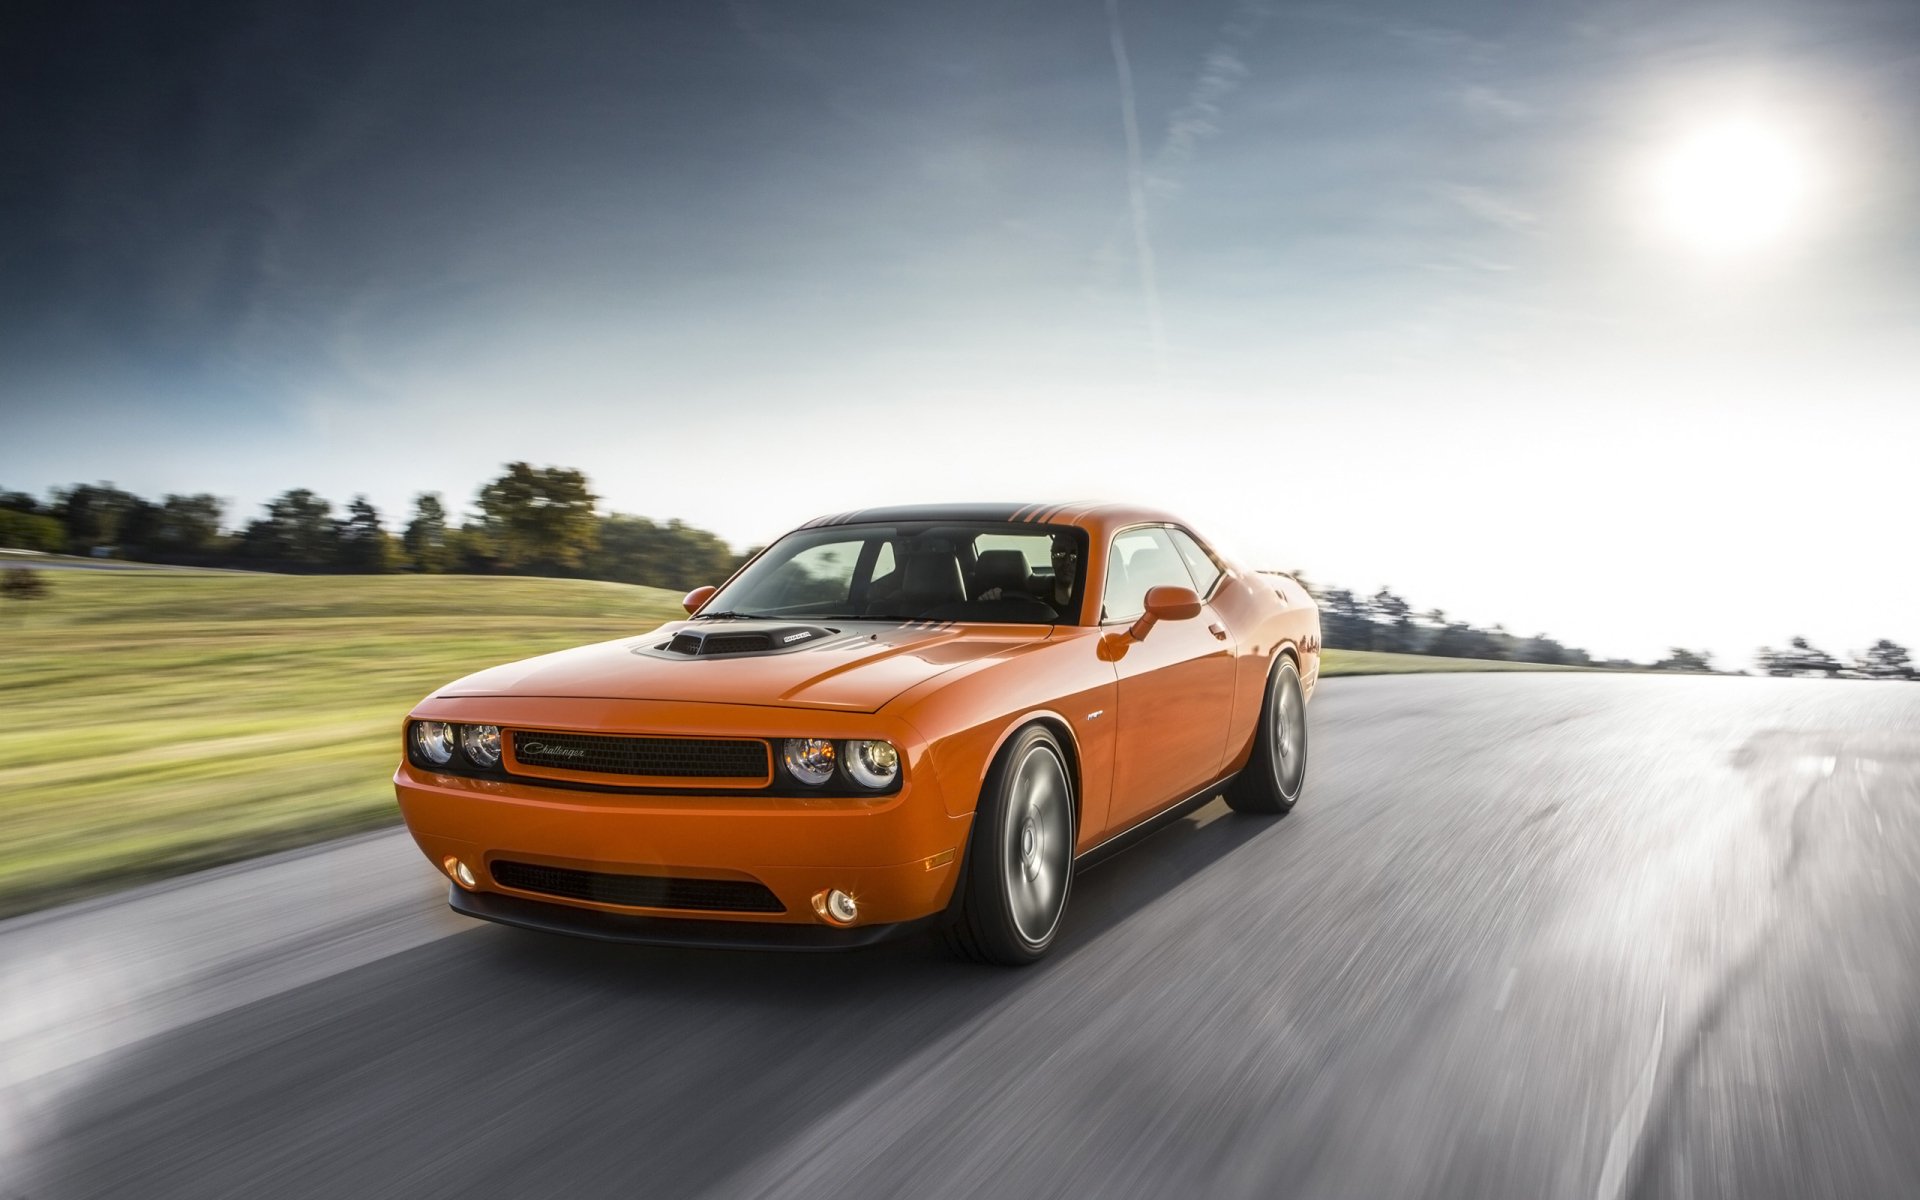 161 Dodge Challenger Tapety HD | Tła - Wallpaper Abyss - Strona 4